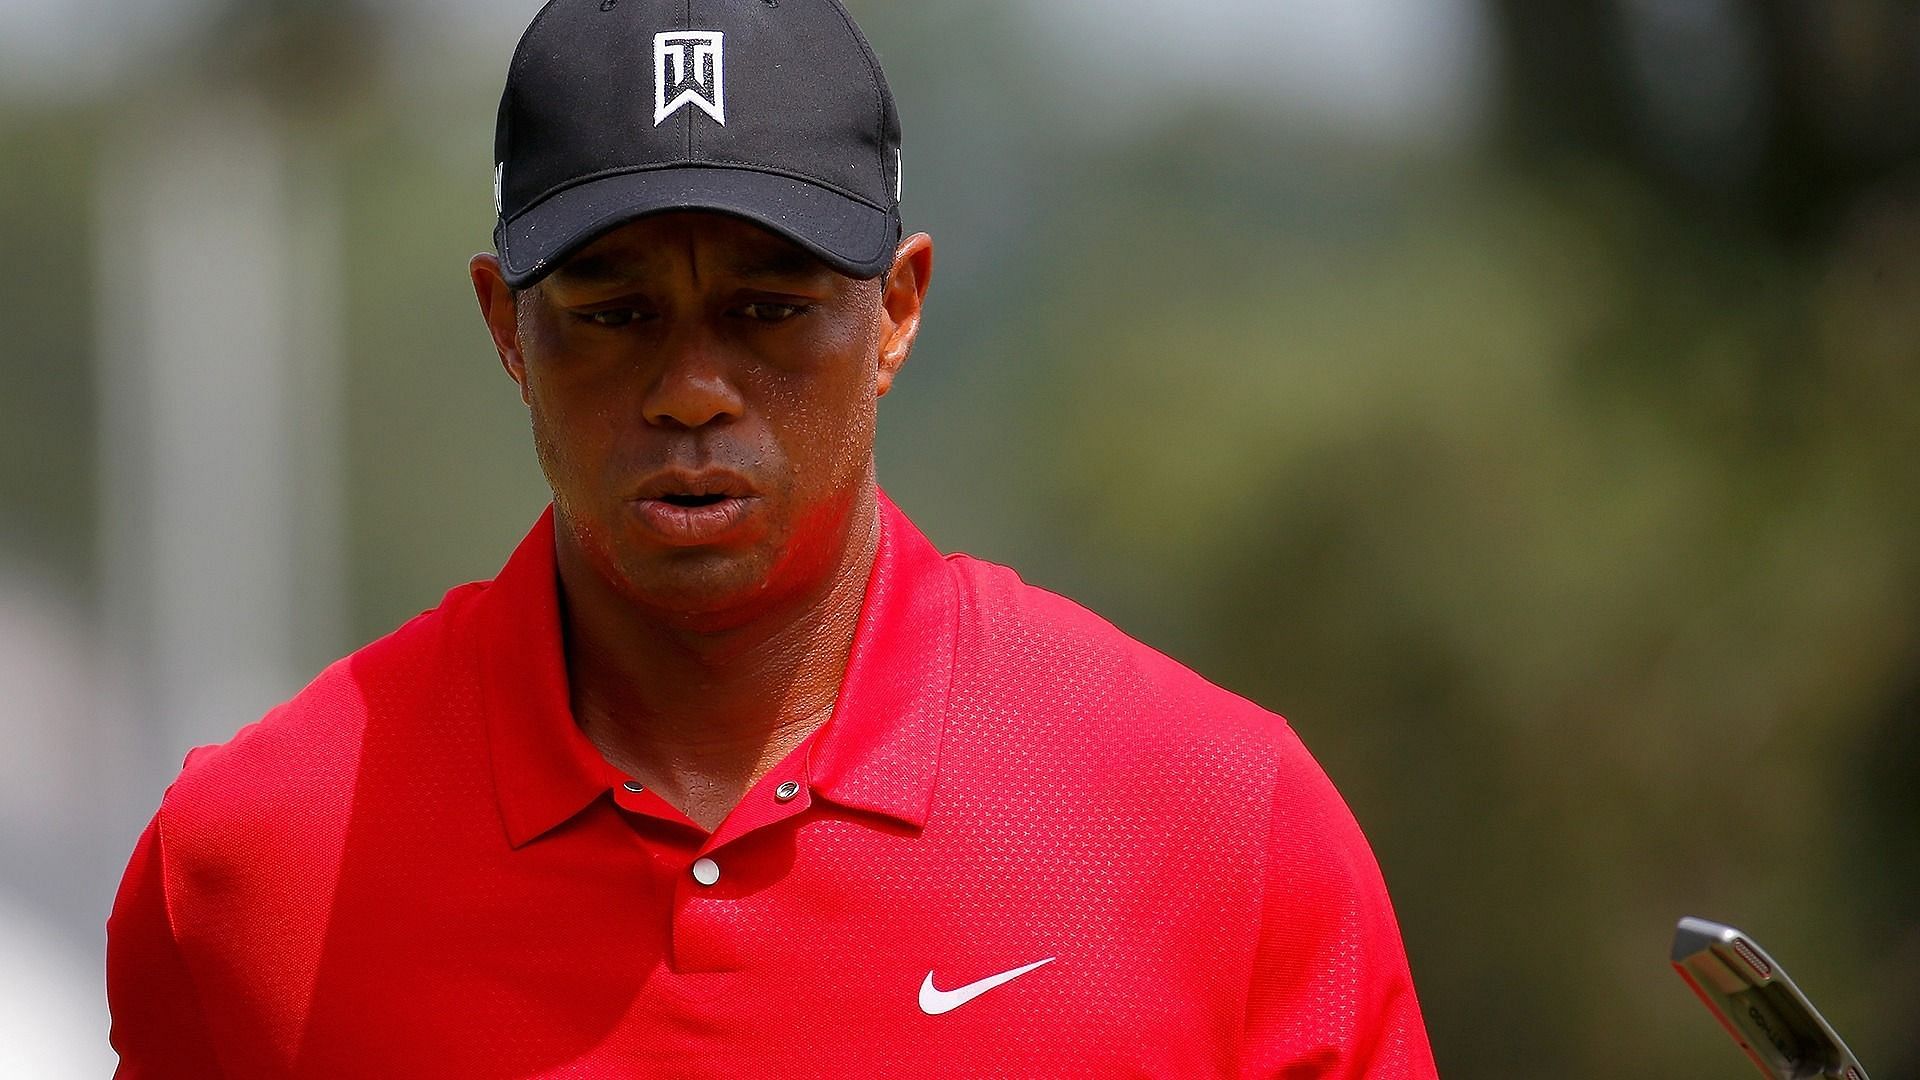 Tiger Woods has faced several controversies over his three decade career